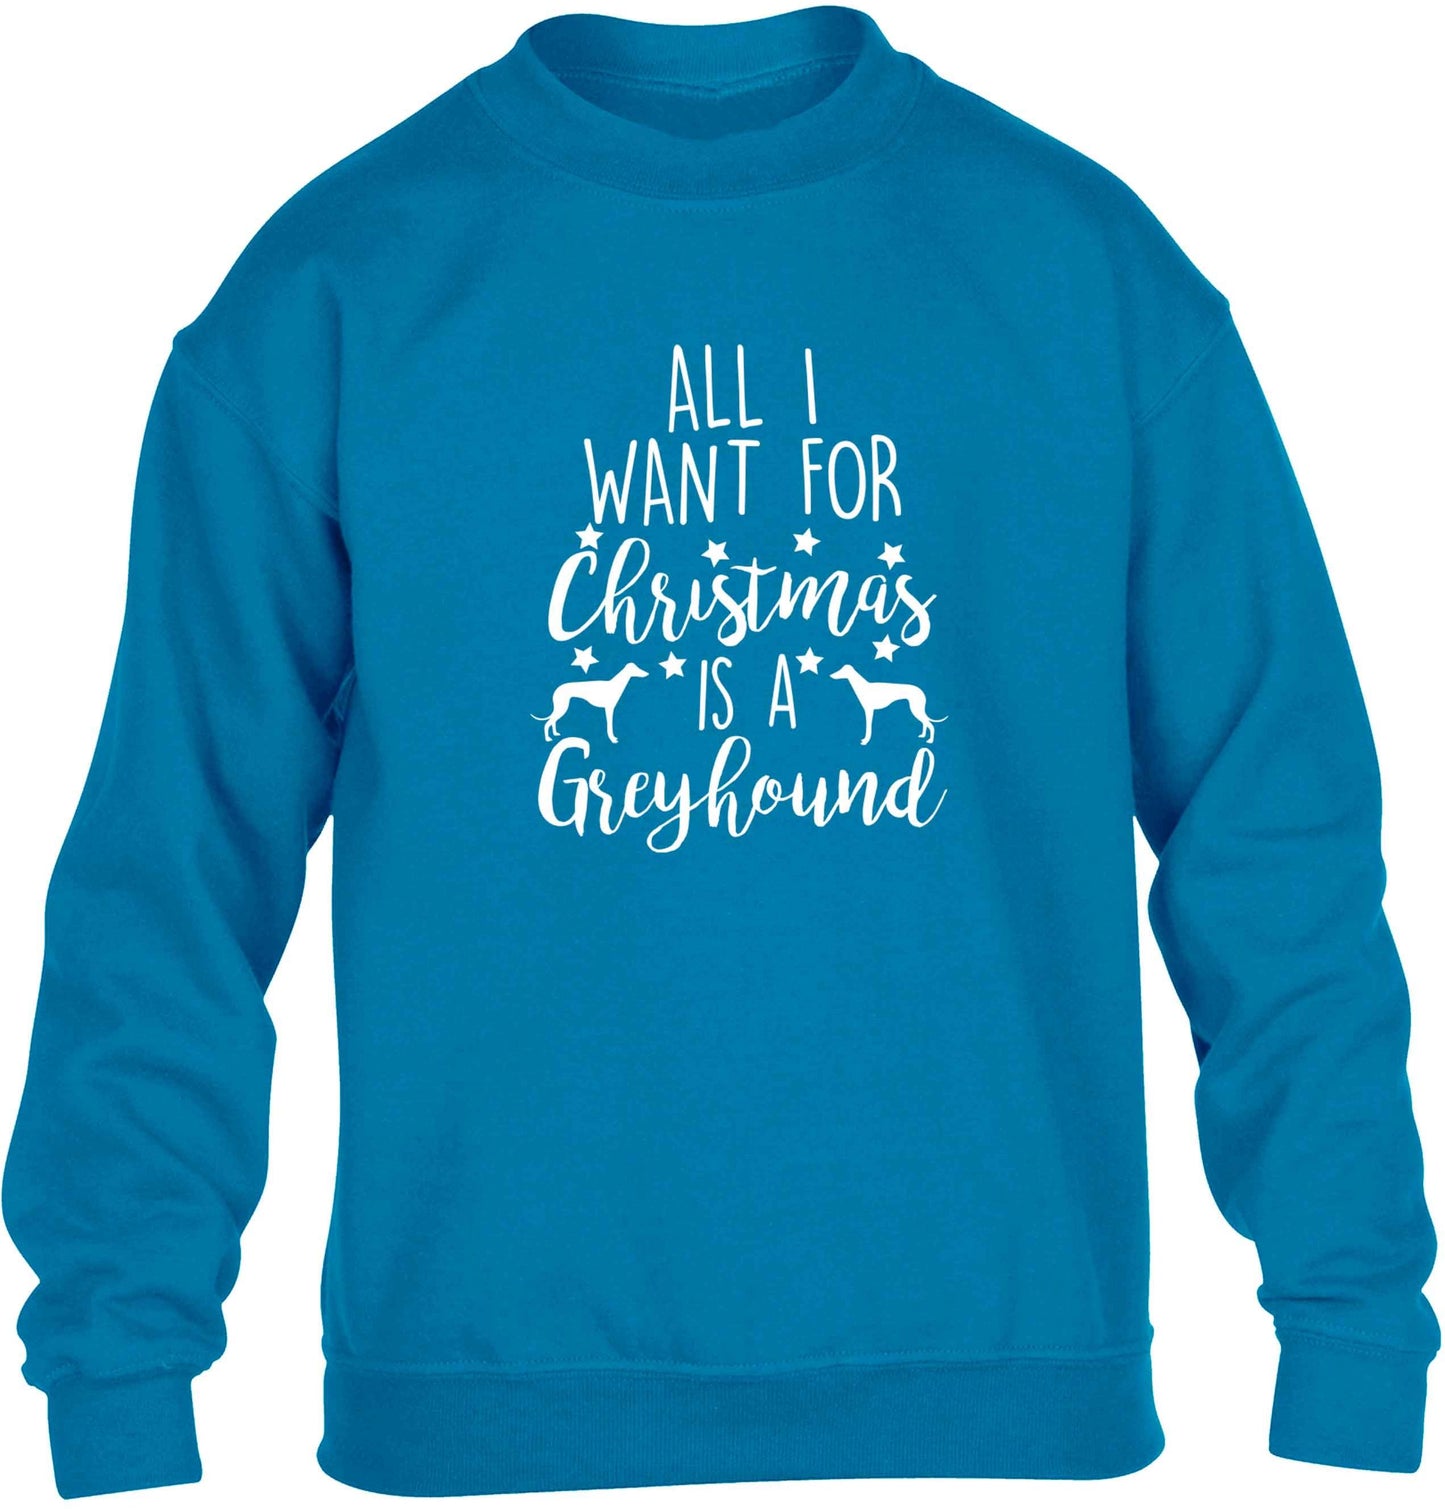 All I want for Christmas is a greyhound children's blue sweater 12-13 Years